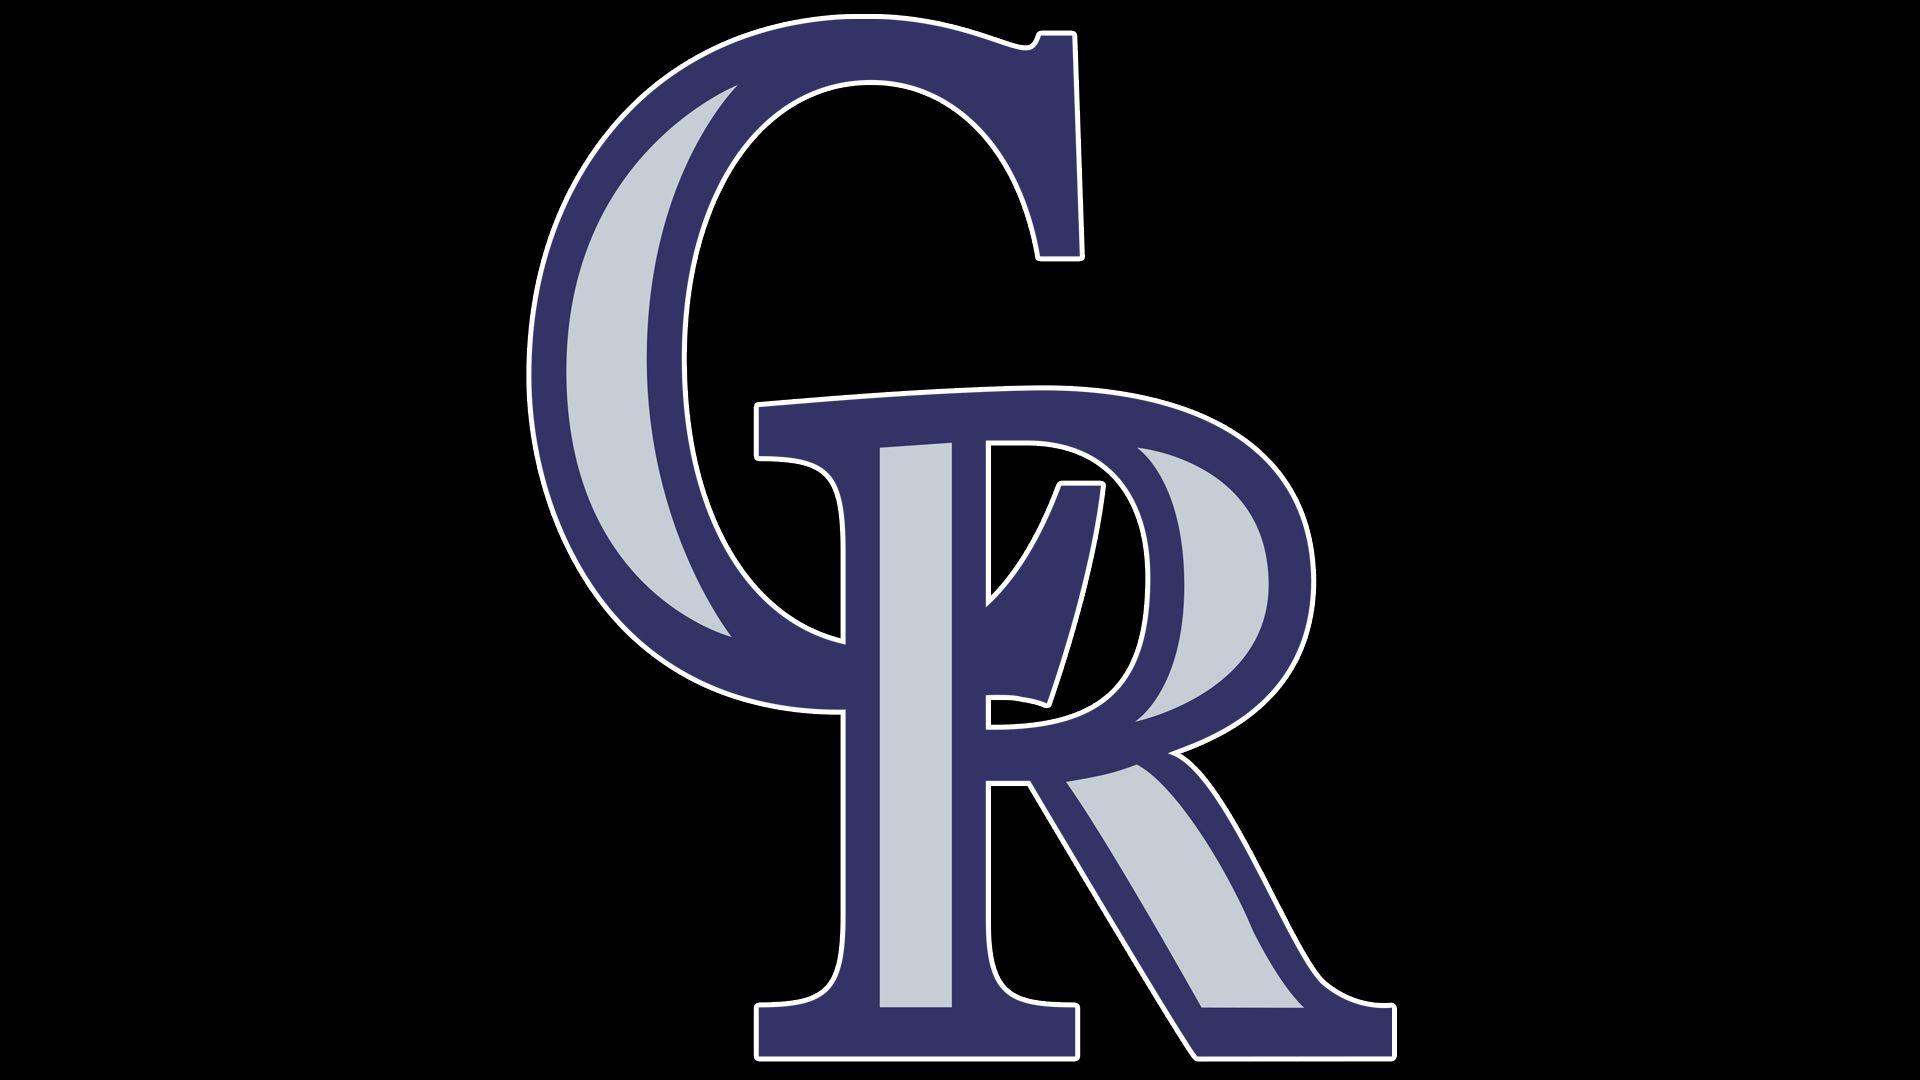 Colorado Rockies Logo - Colorado Rockies Logo, Colorado Rockies Symbol, Meaning, History